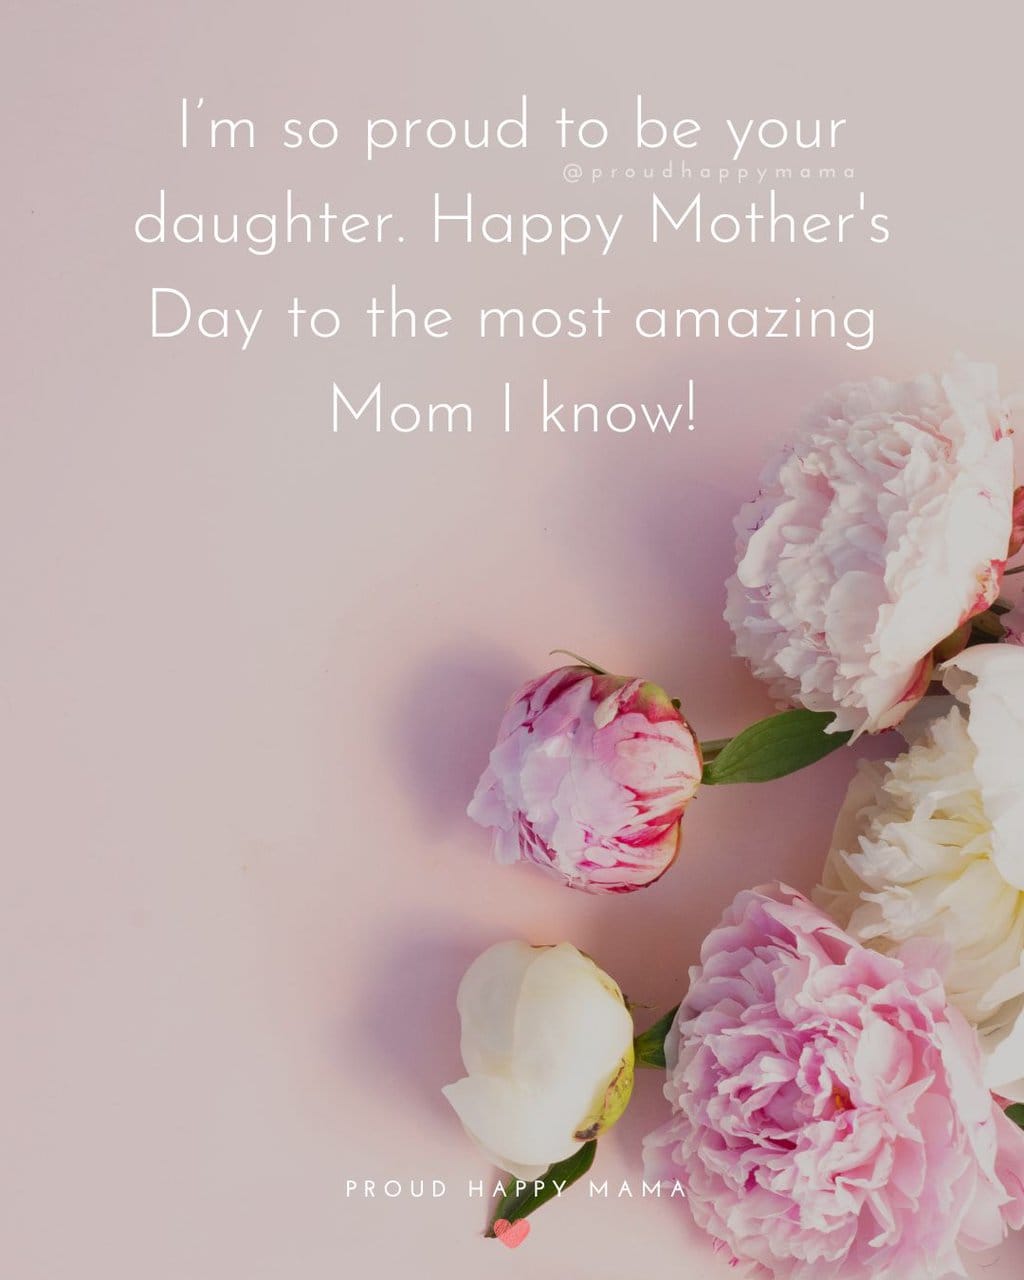 heartfelt mothers day quote from daughter